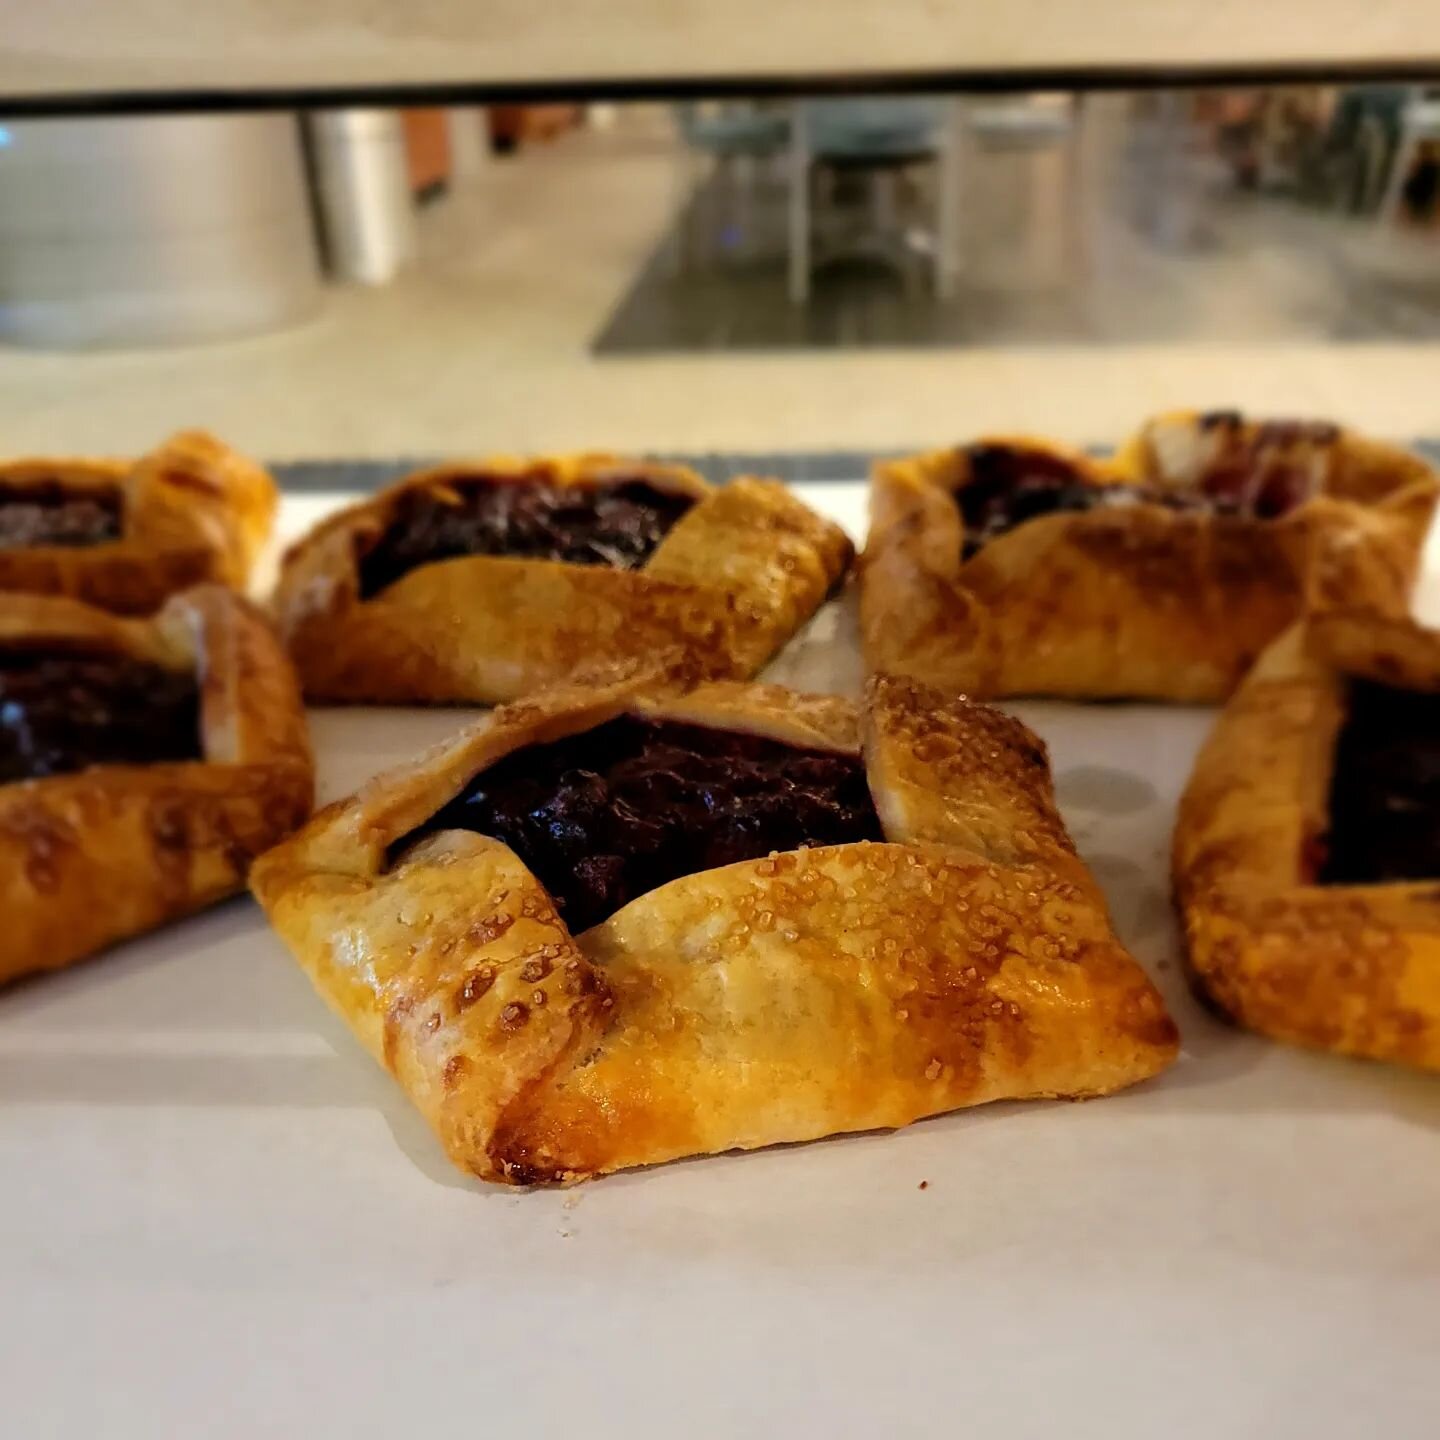 New bites in the pastry case! Raspberry Galettes now available! #rvaeats #rvadine #downtownrva #lunchtime